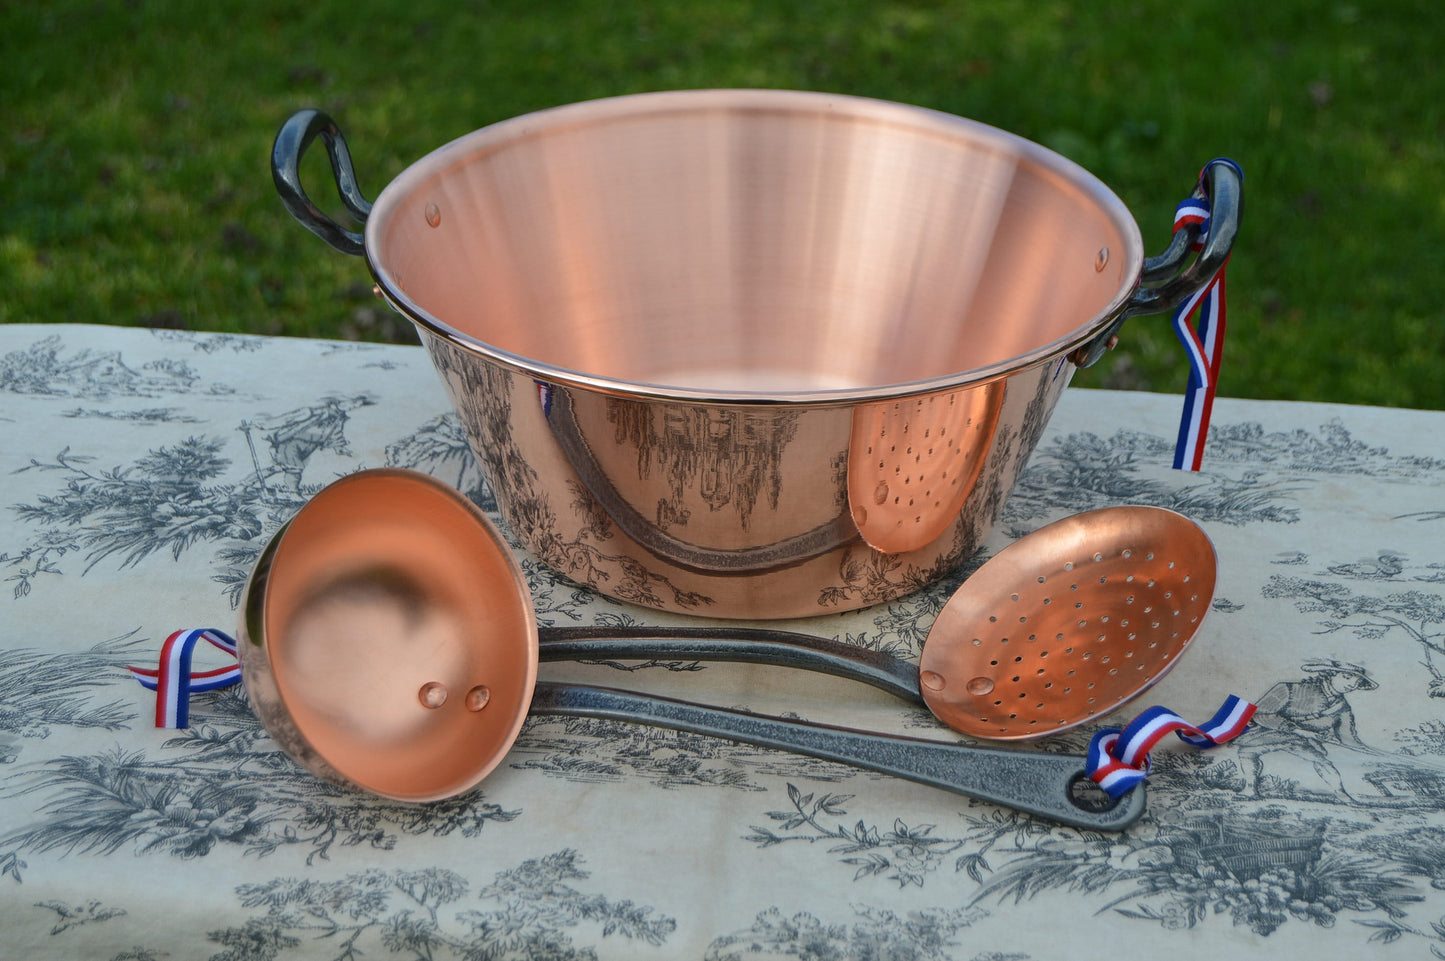 New NKC 28cm Copper Jam Pan Set Ecumoire and Louche NKC Normandy Kitchen Copper Jam Jelly 28cm 11" Rolled Top Iron Handles Skimmer Ladle